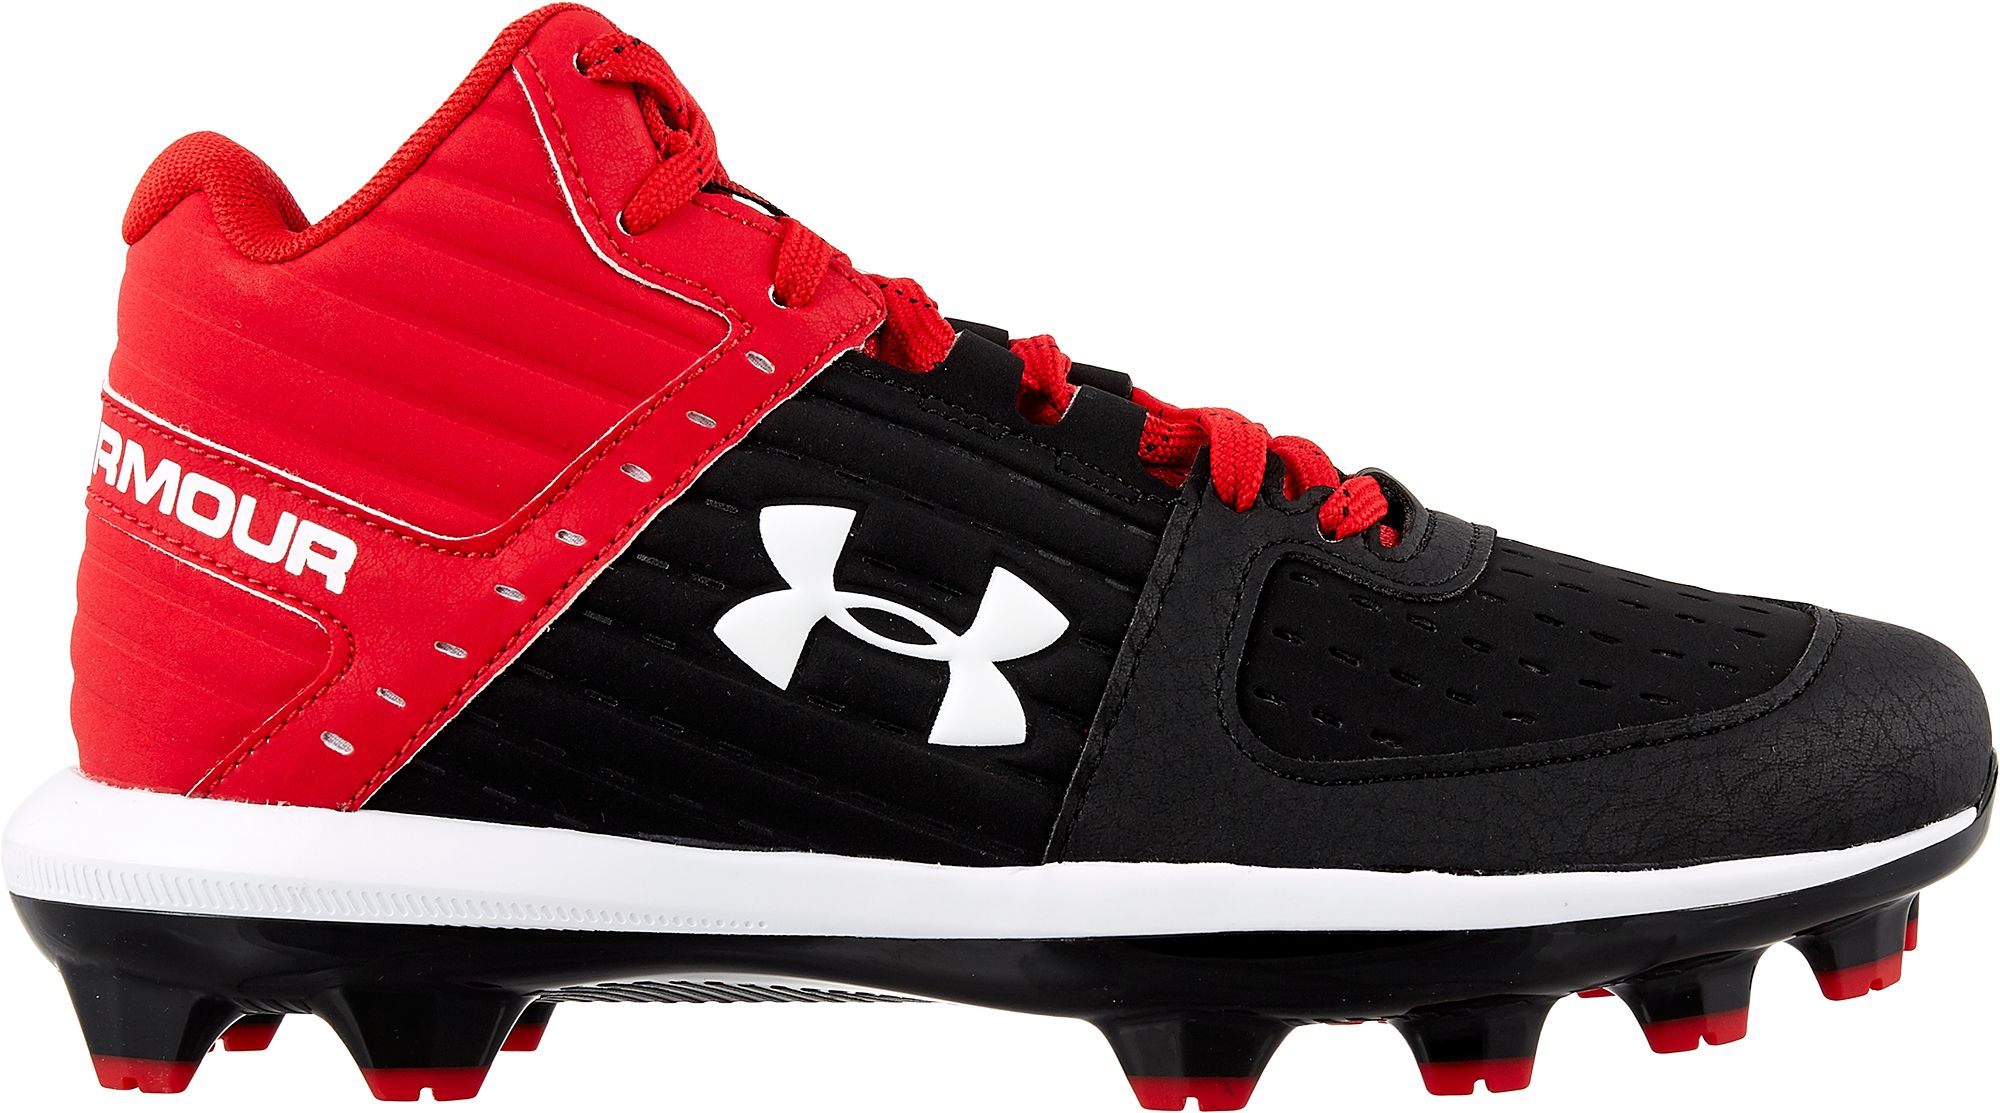 red under armor cleats